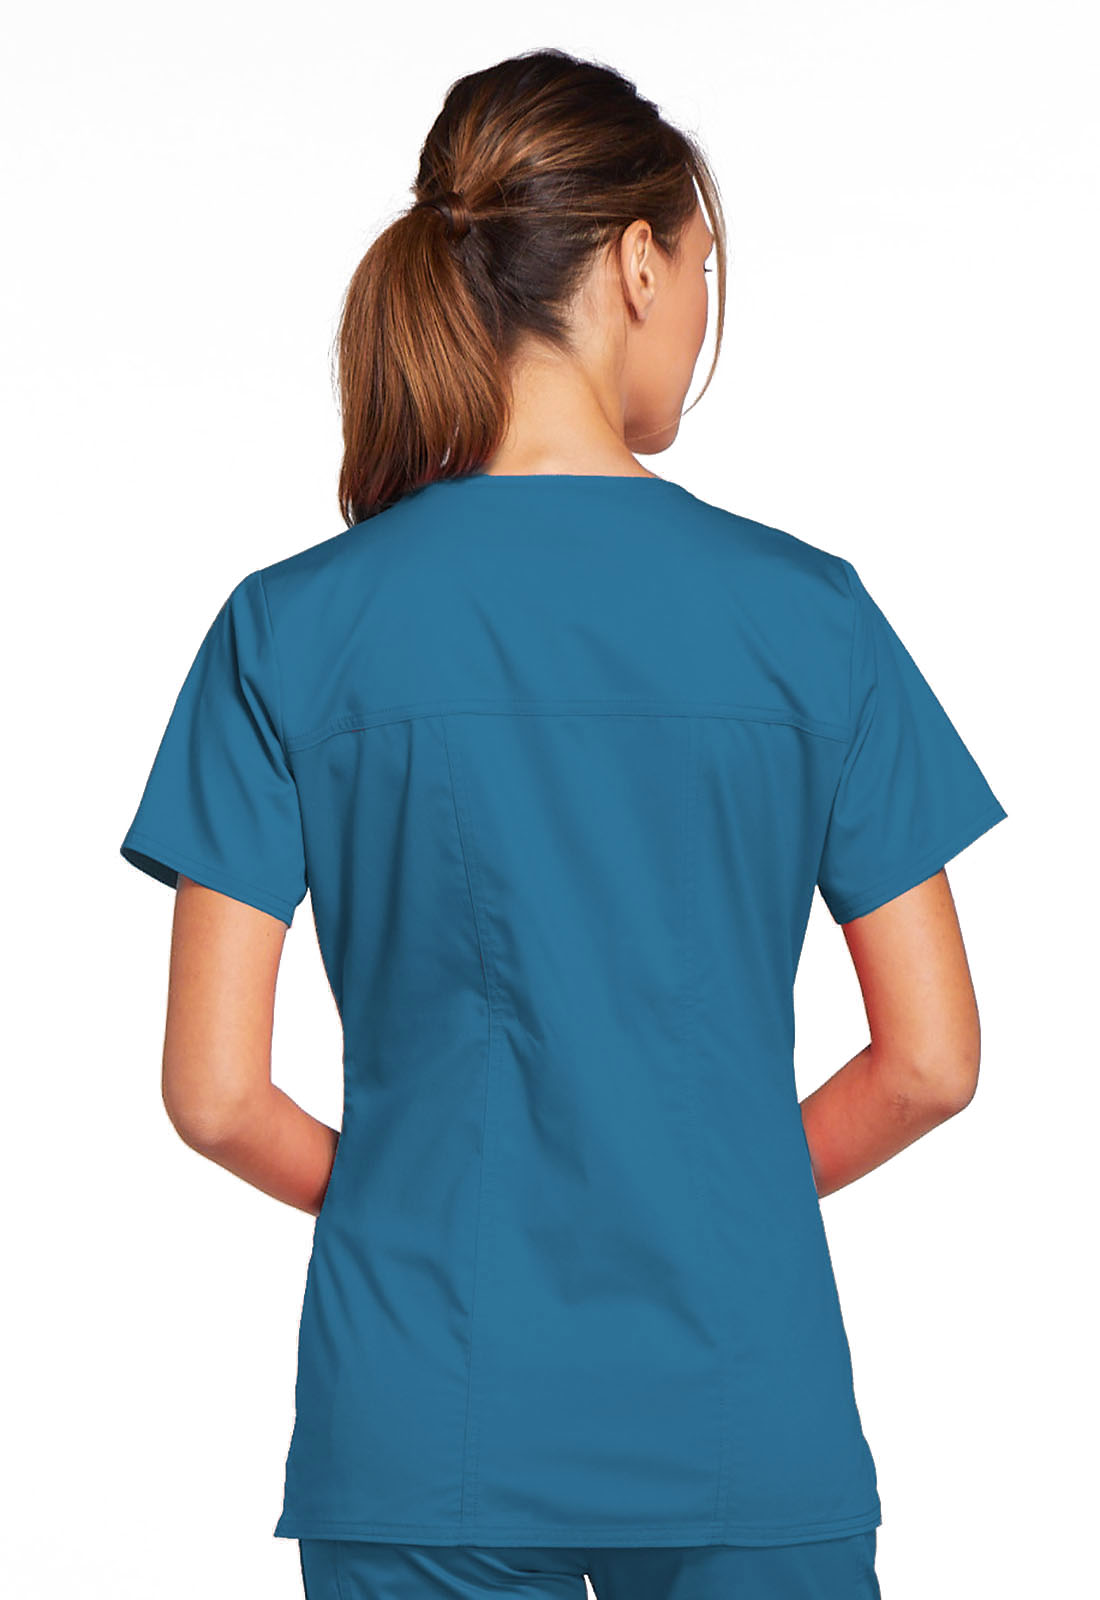 WW Core Stretch V-Neck Top in Caribbean Blue 4727-CARW from Cherokee ...